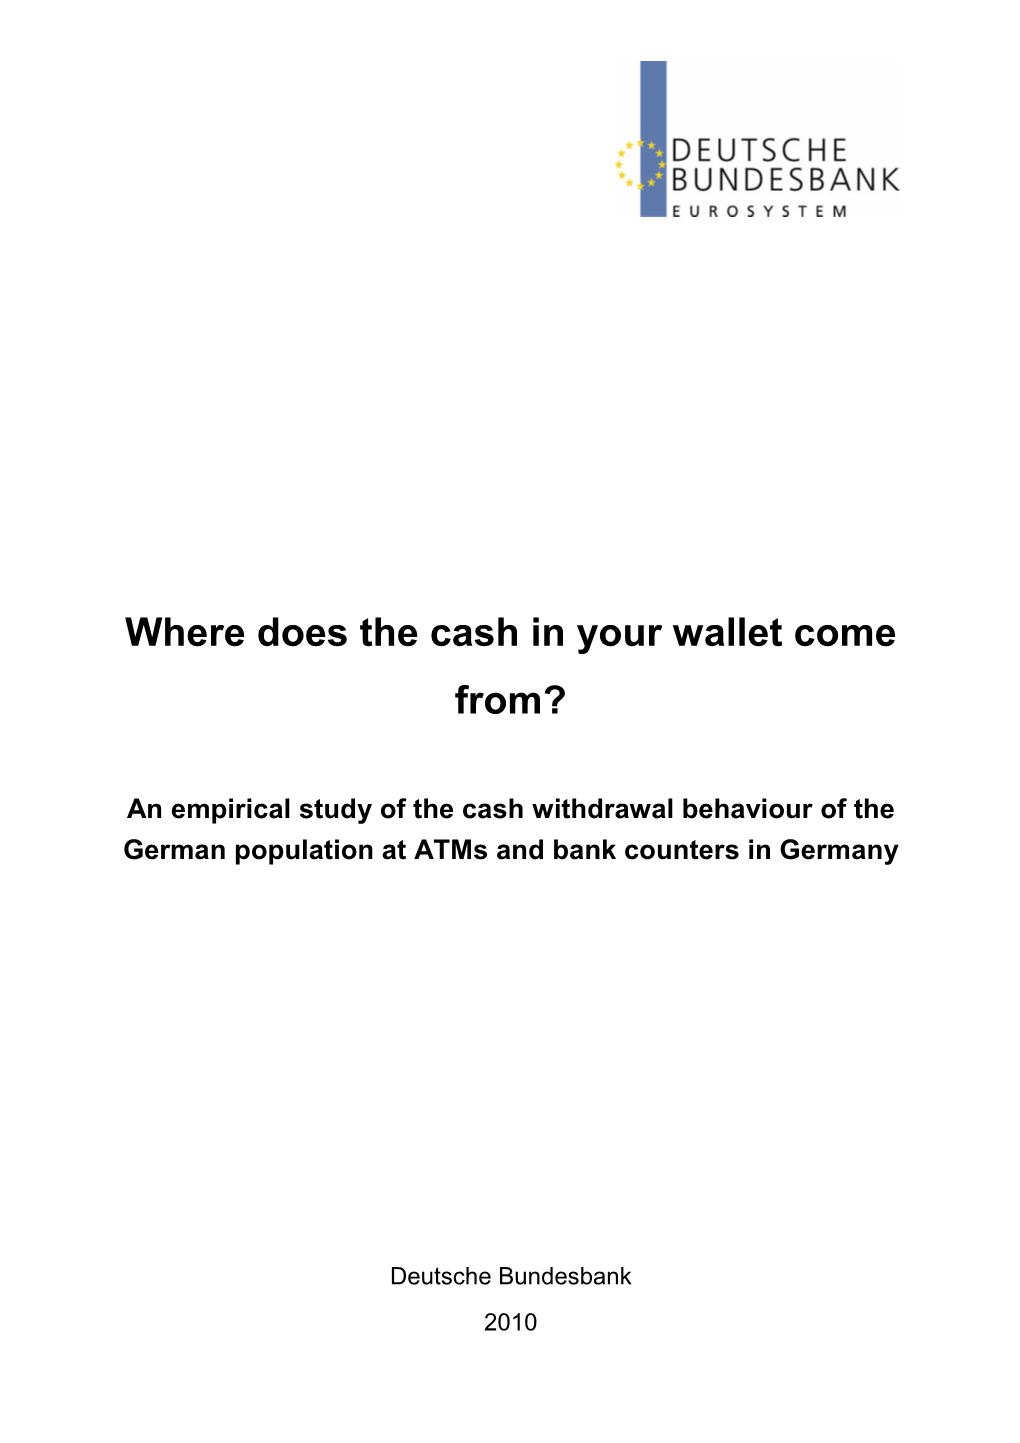 Where Does the Cash in Your Wallet Come From?